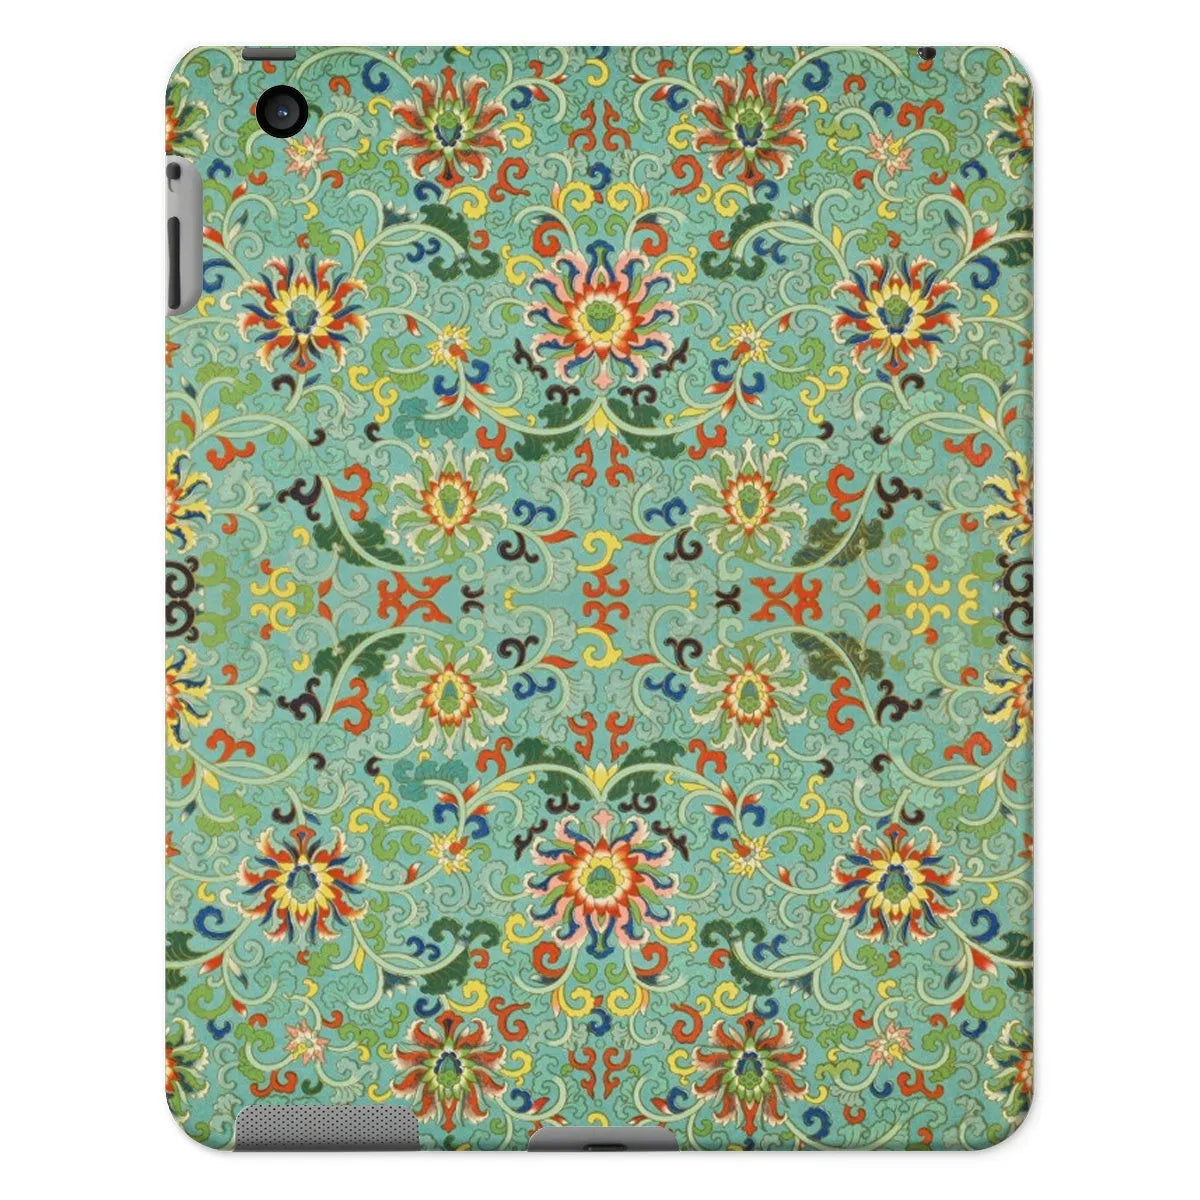 Lotus Candy Tablet Cases - Ipad 2/3/4 - Aesthetic Art